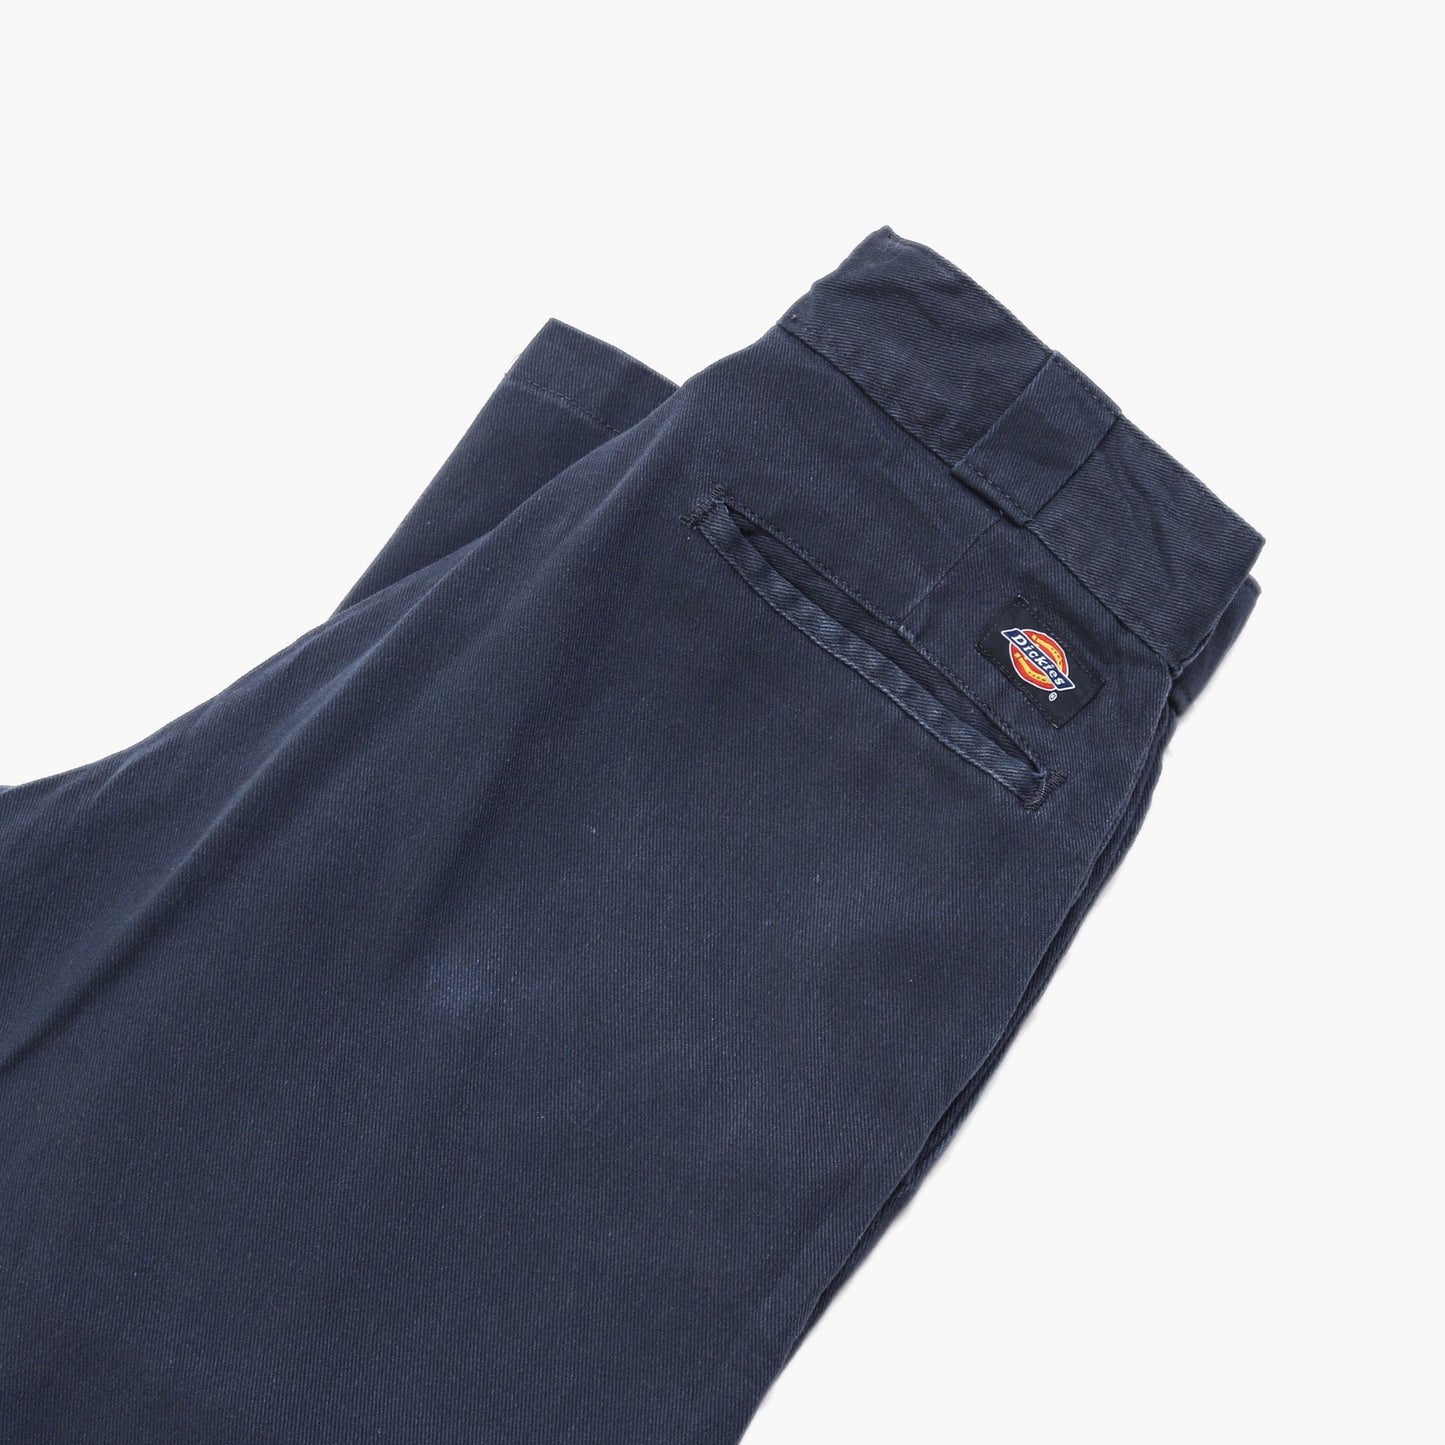 874 Work Trousers - Navy - 30/32 - American Madness